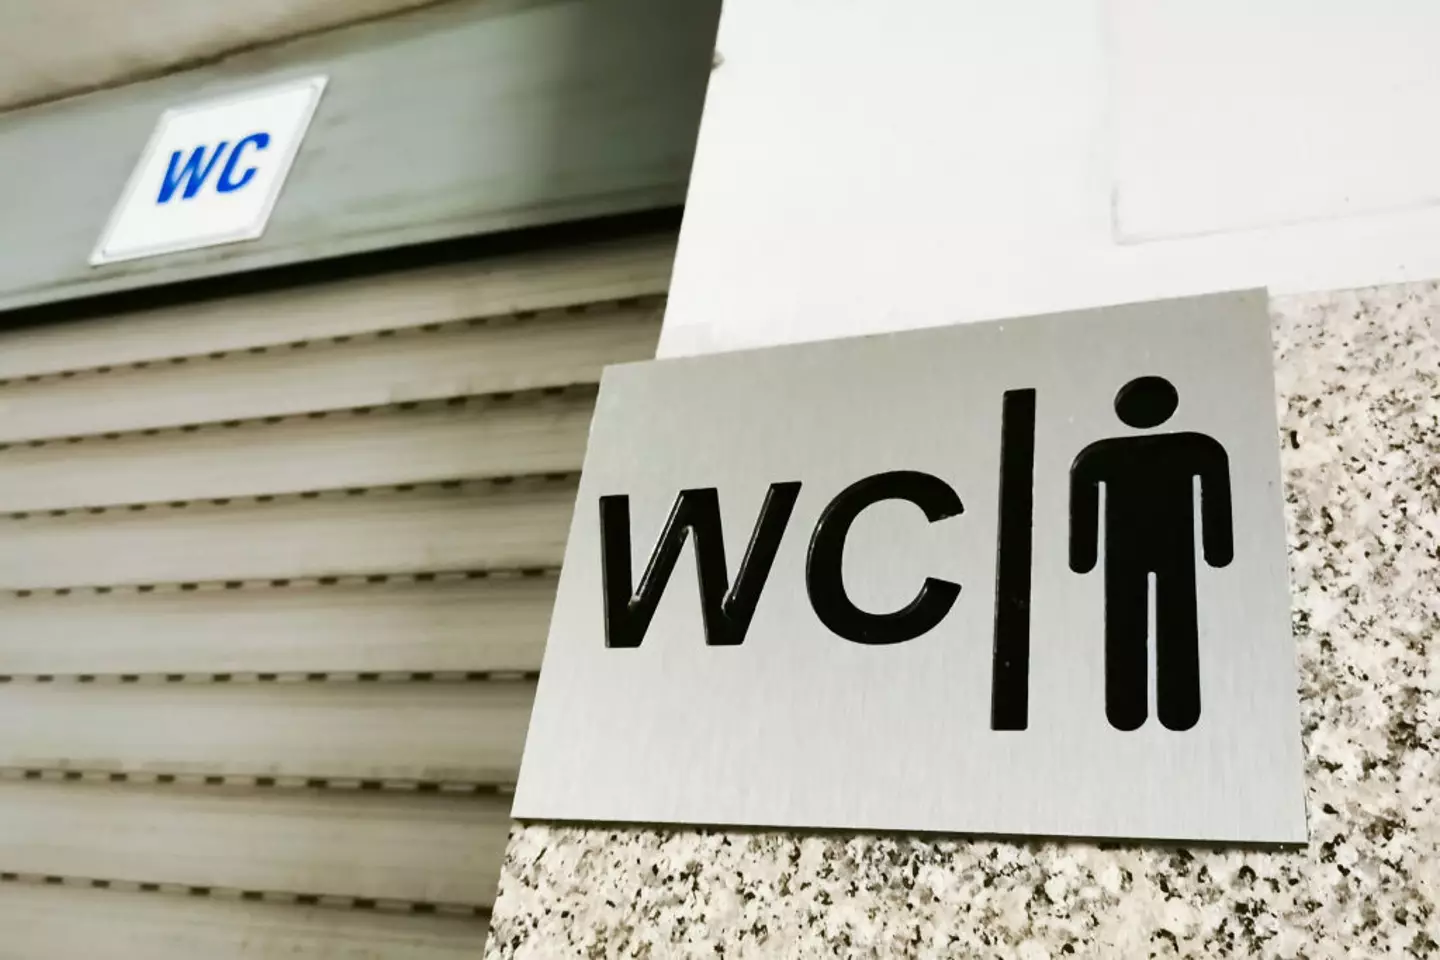 It turns out that WC stands for 'water closet'.